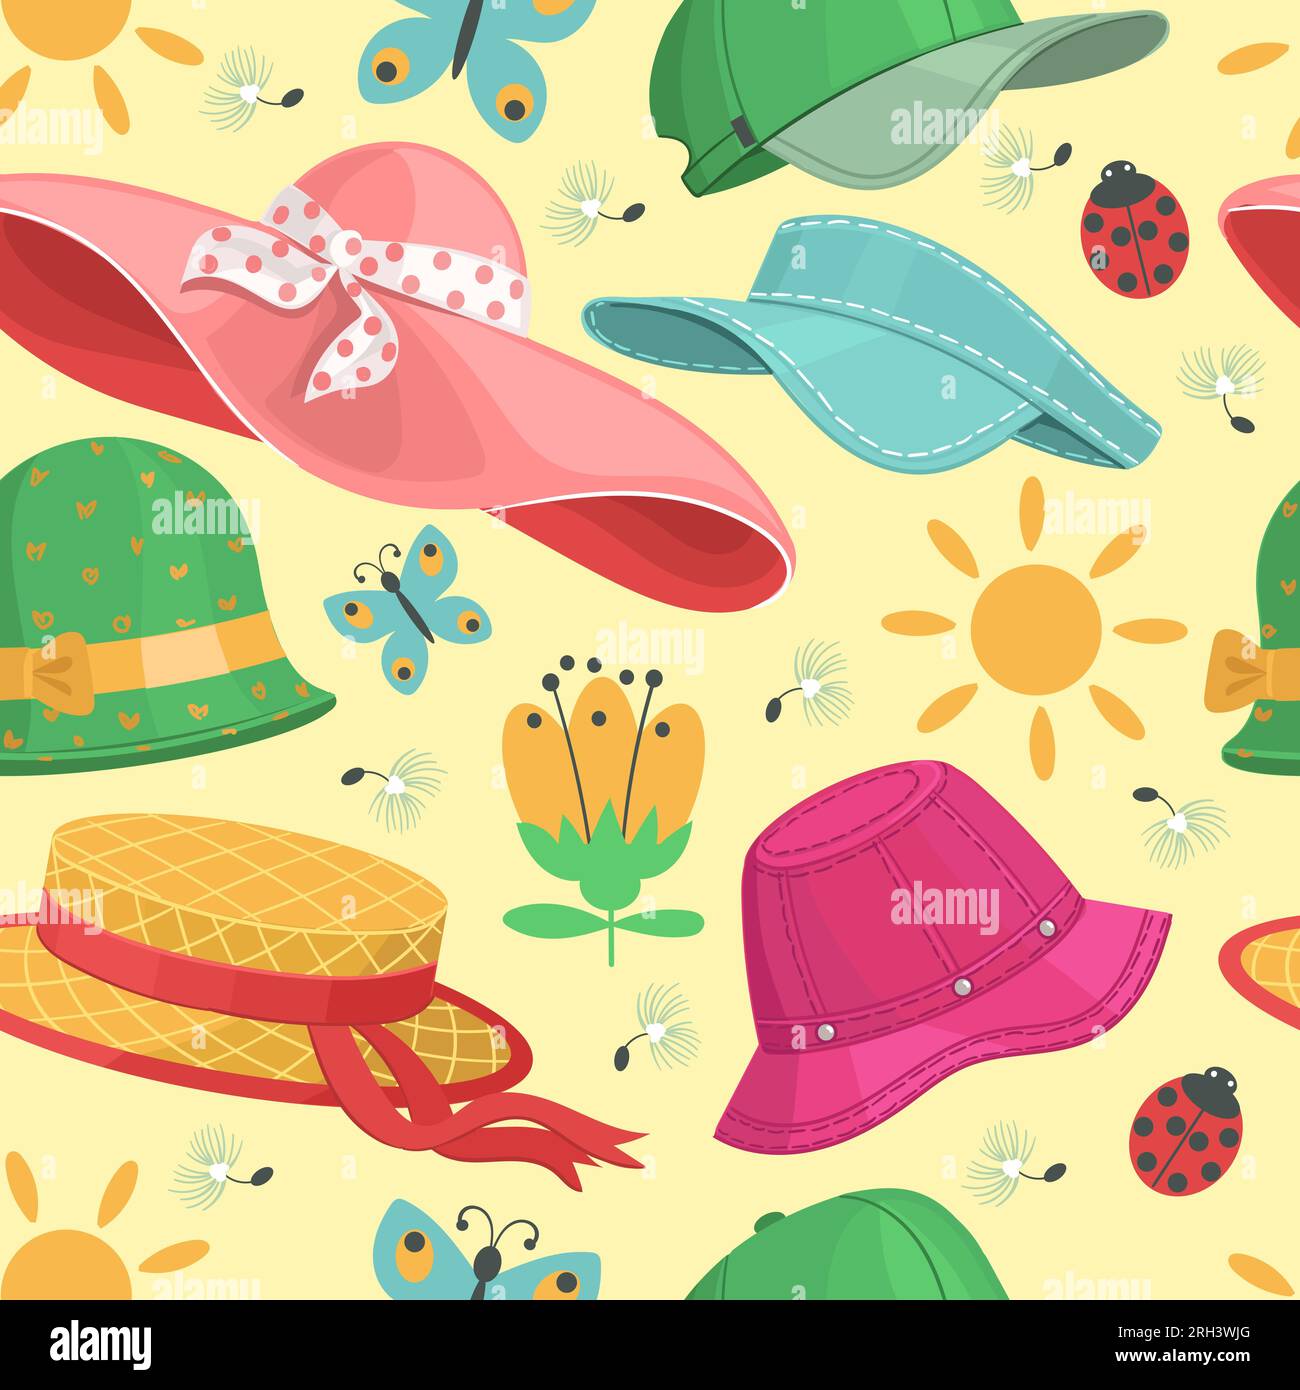 Hats and headgears seamless pattern. Cartoon summer wide brimmed panama. Caps and bowlers with ribbons. Straw boater. Flowers and butterflies. Beach Stock Vector